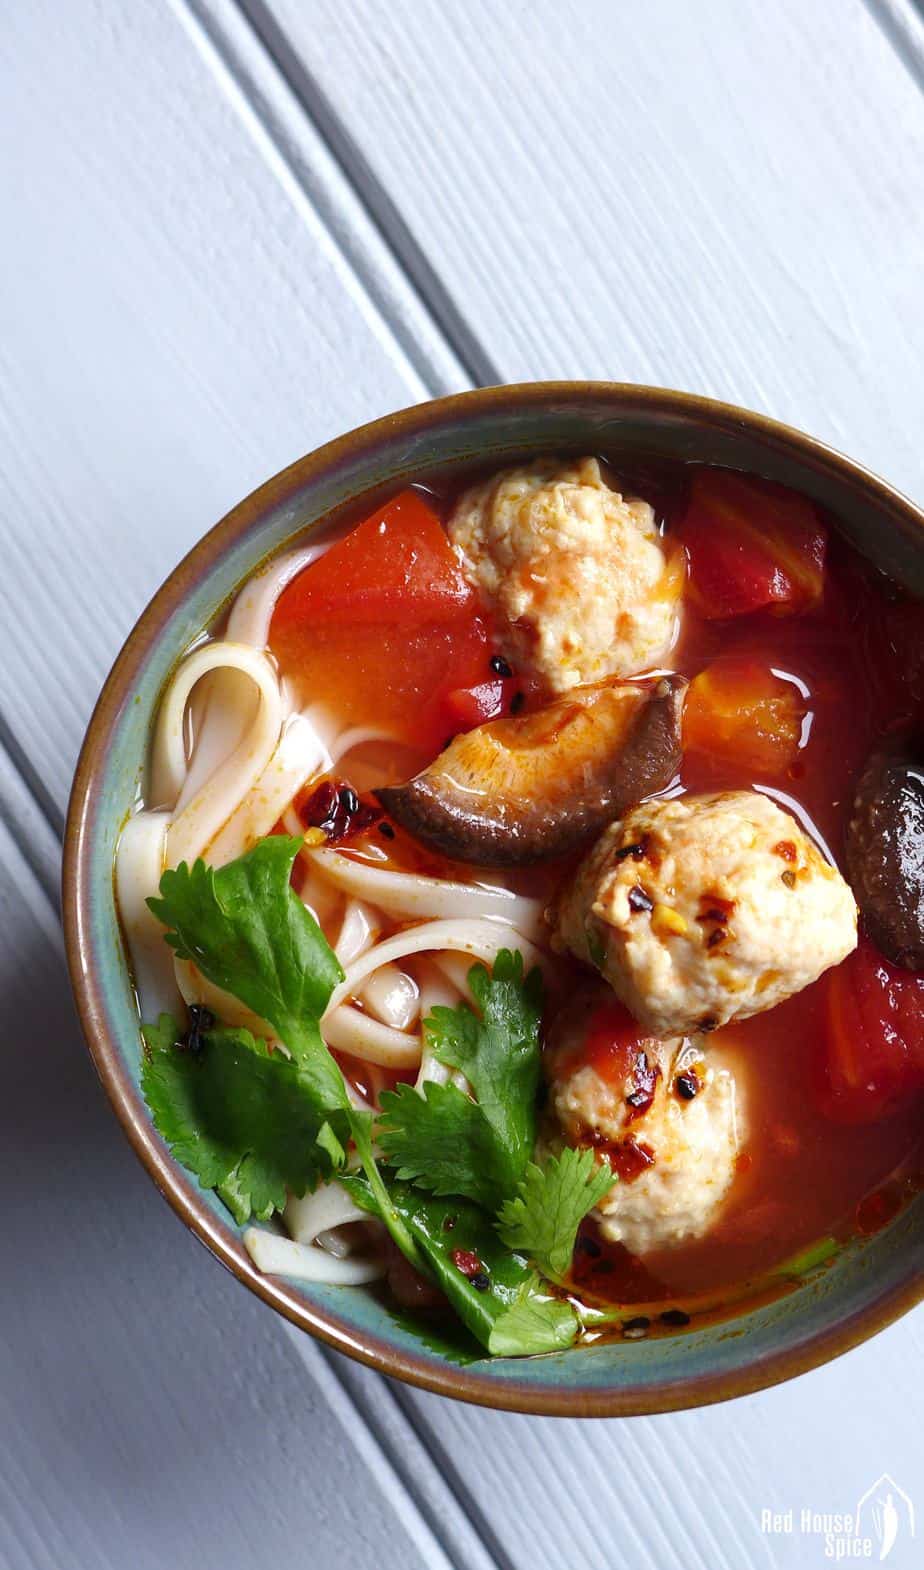 Tender and springy meatballs cooked in tomato and shiitake soup. This chicken meatball noodle soup is super tasty, filling and healthy.